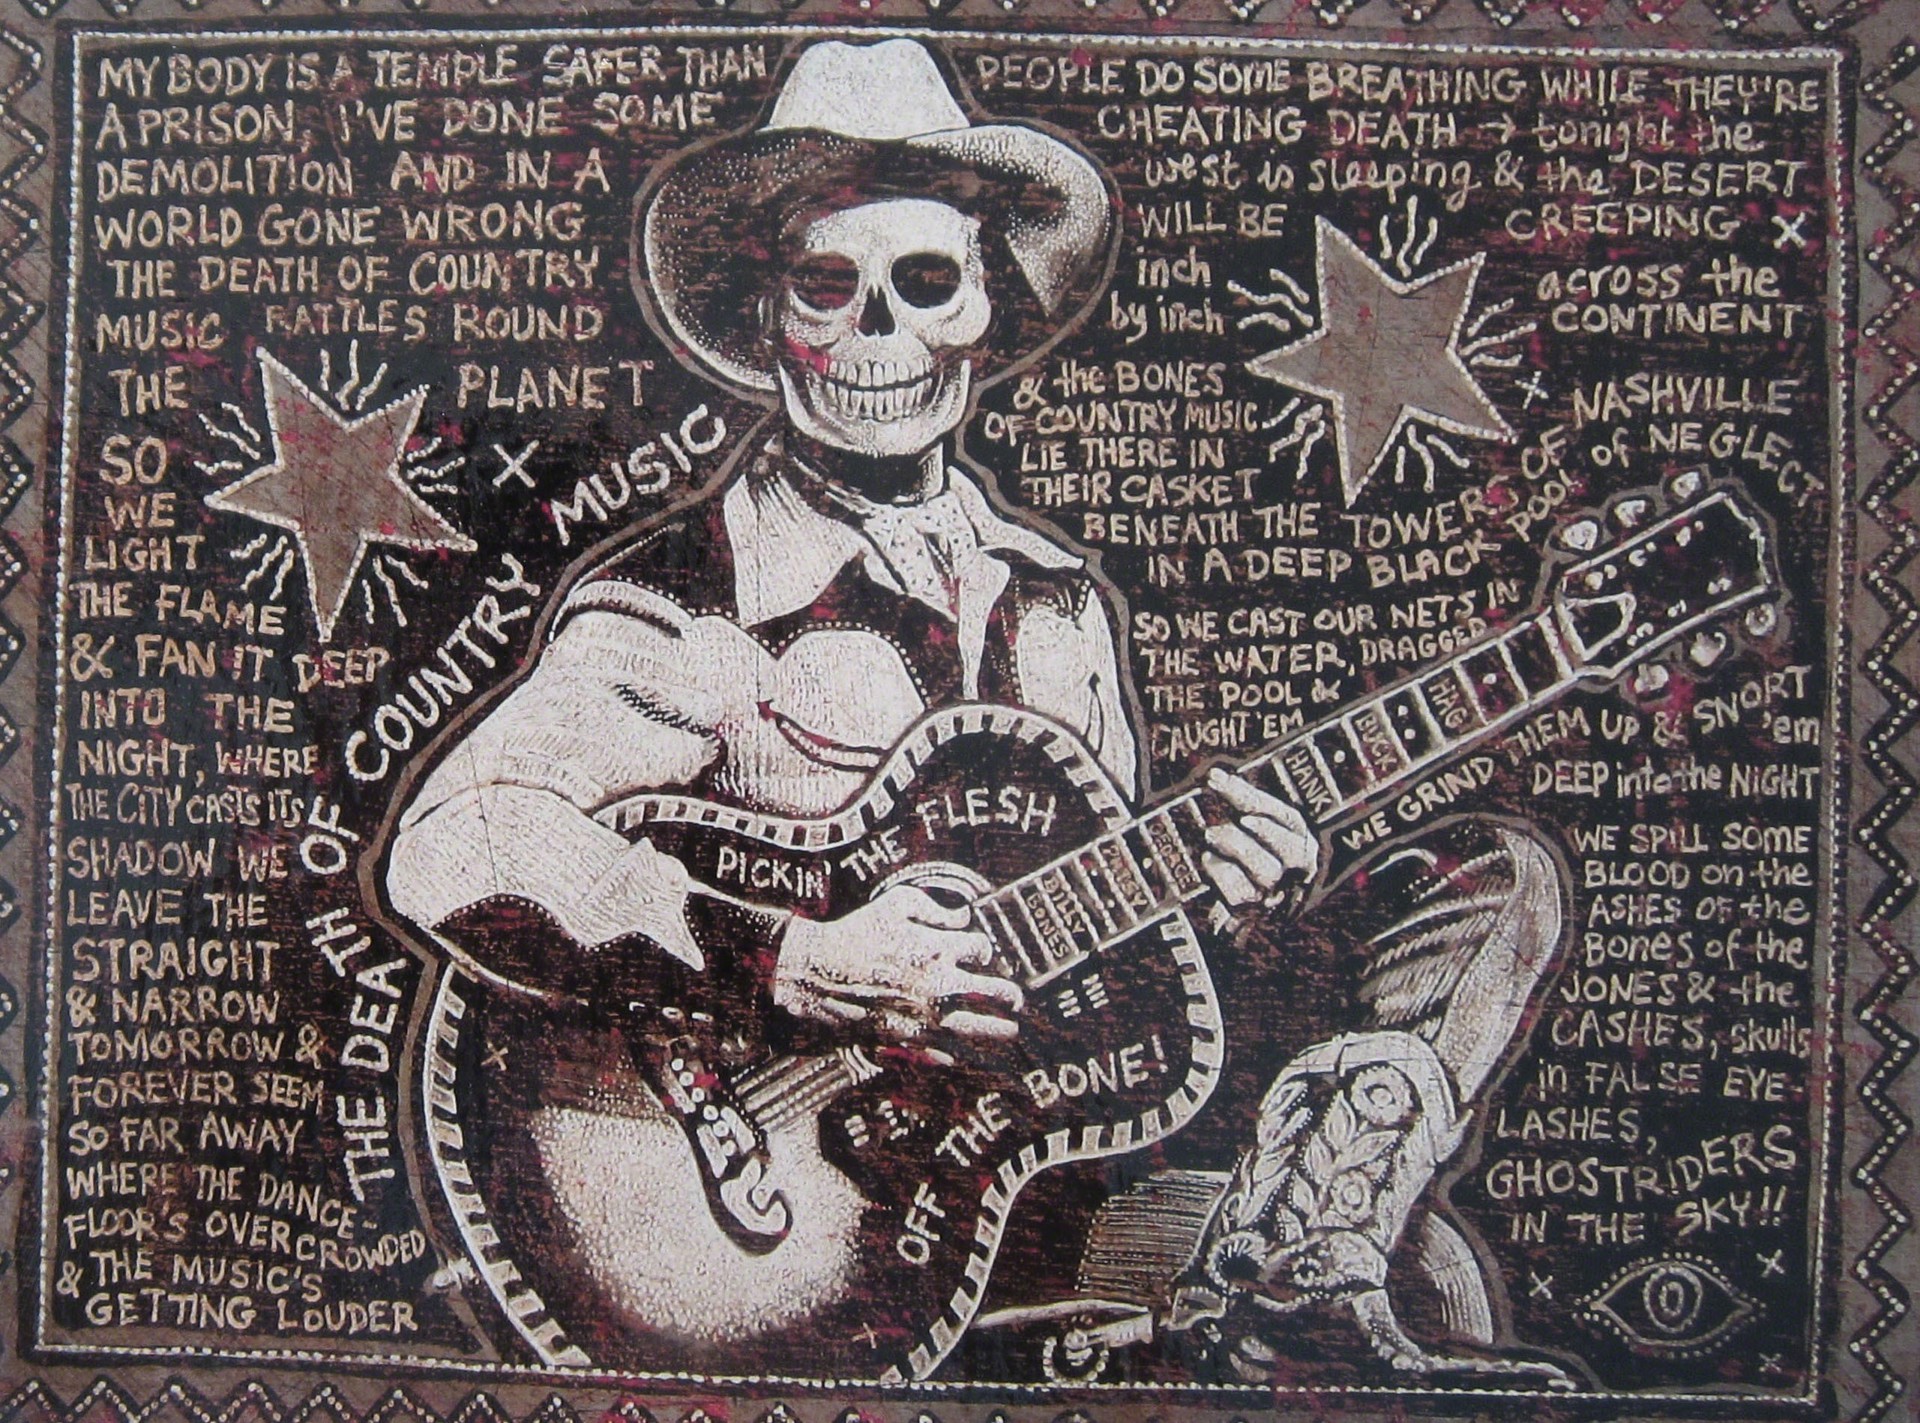 The Death of Country Music (A.P.) by Jon Langford